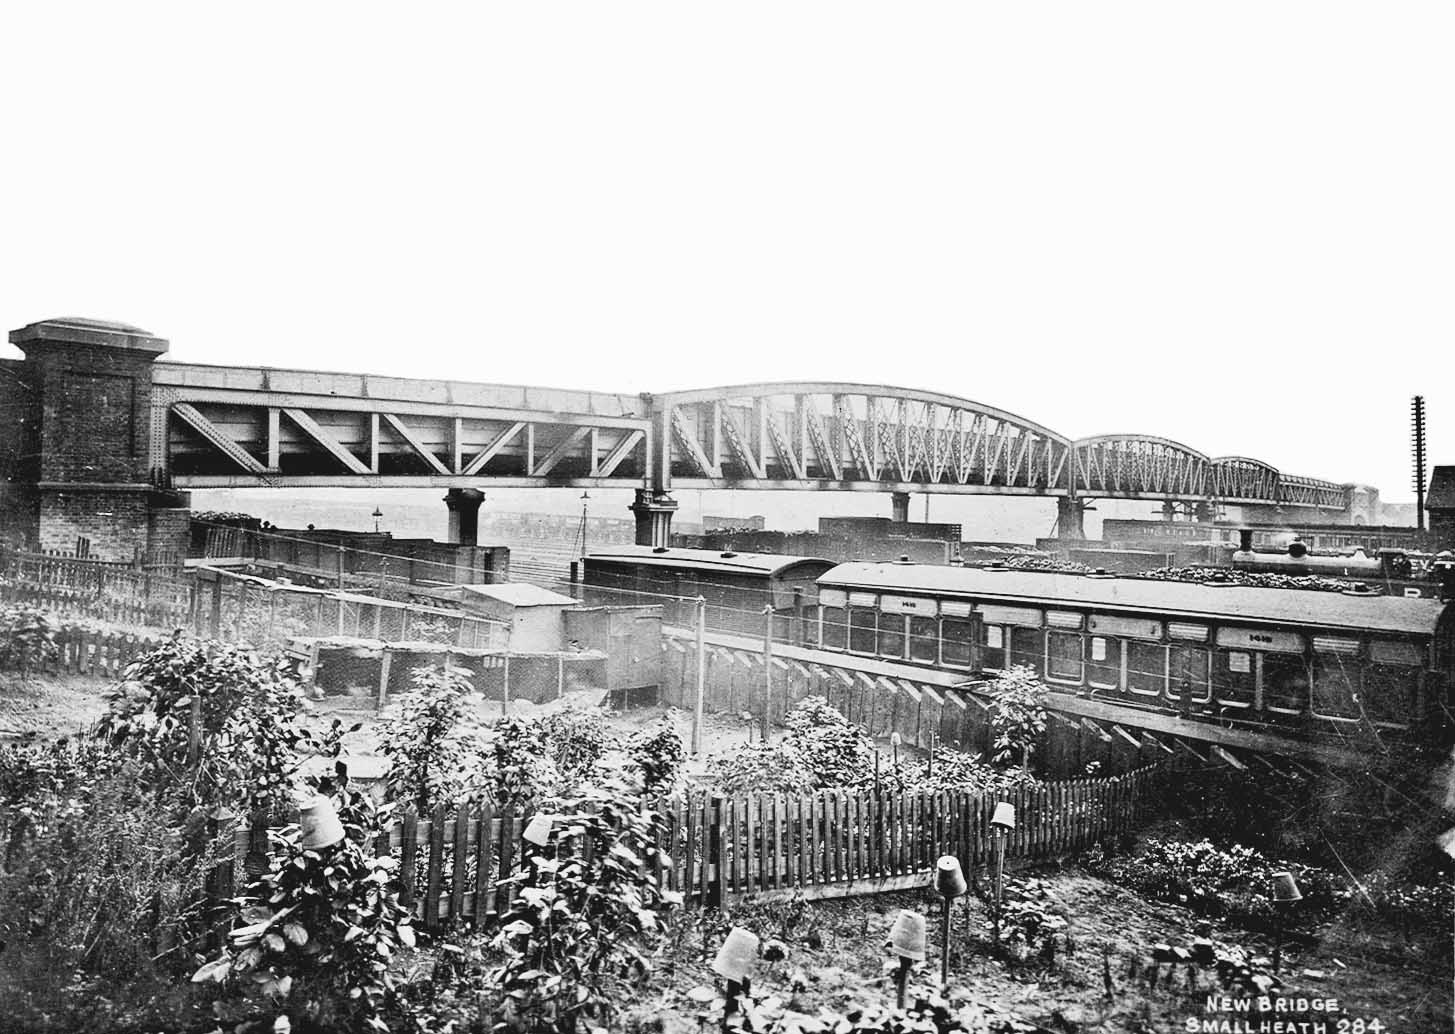 An Edwardian view of Small Heath Bridge which opened in 1904 to span both the railway and the Warwick & Birmingham Canal